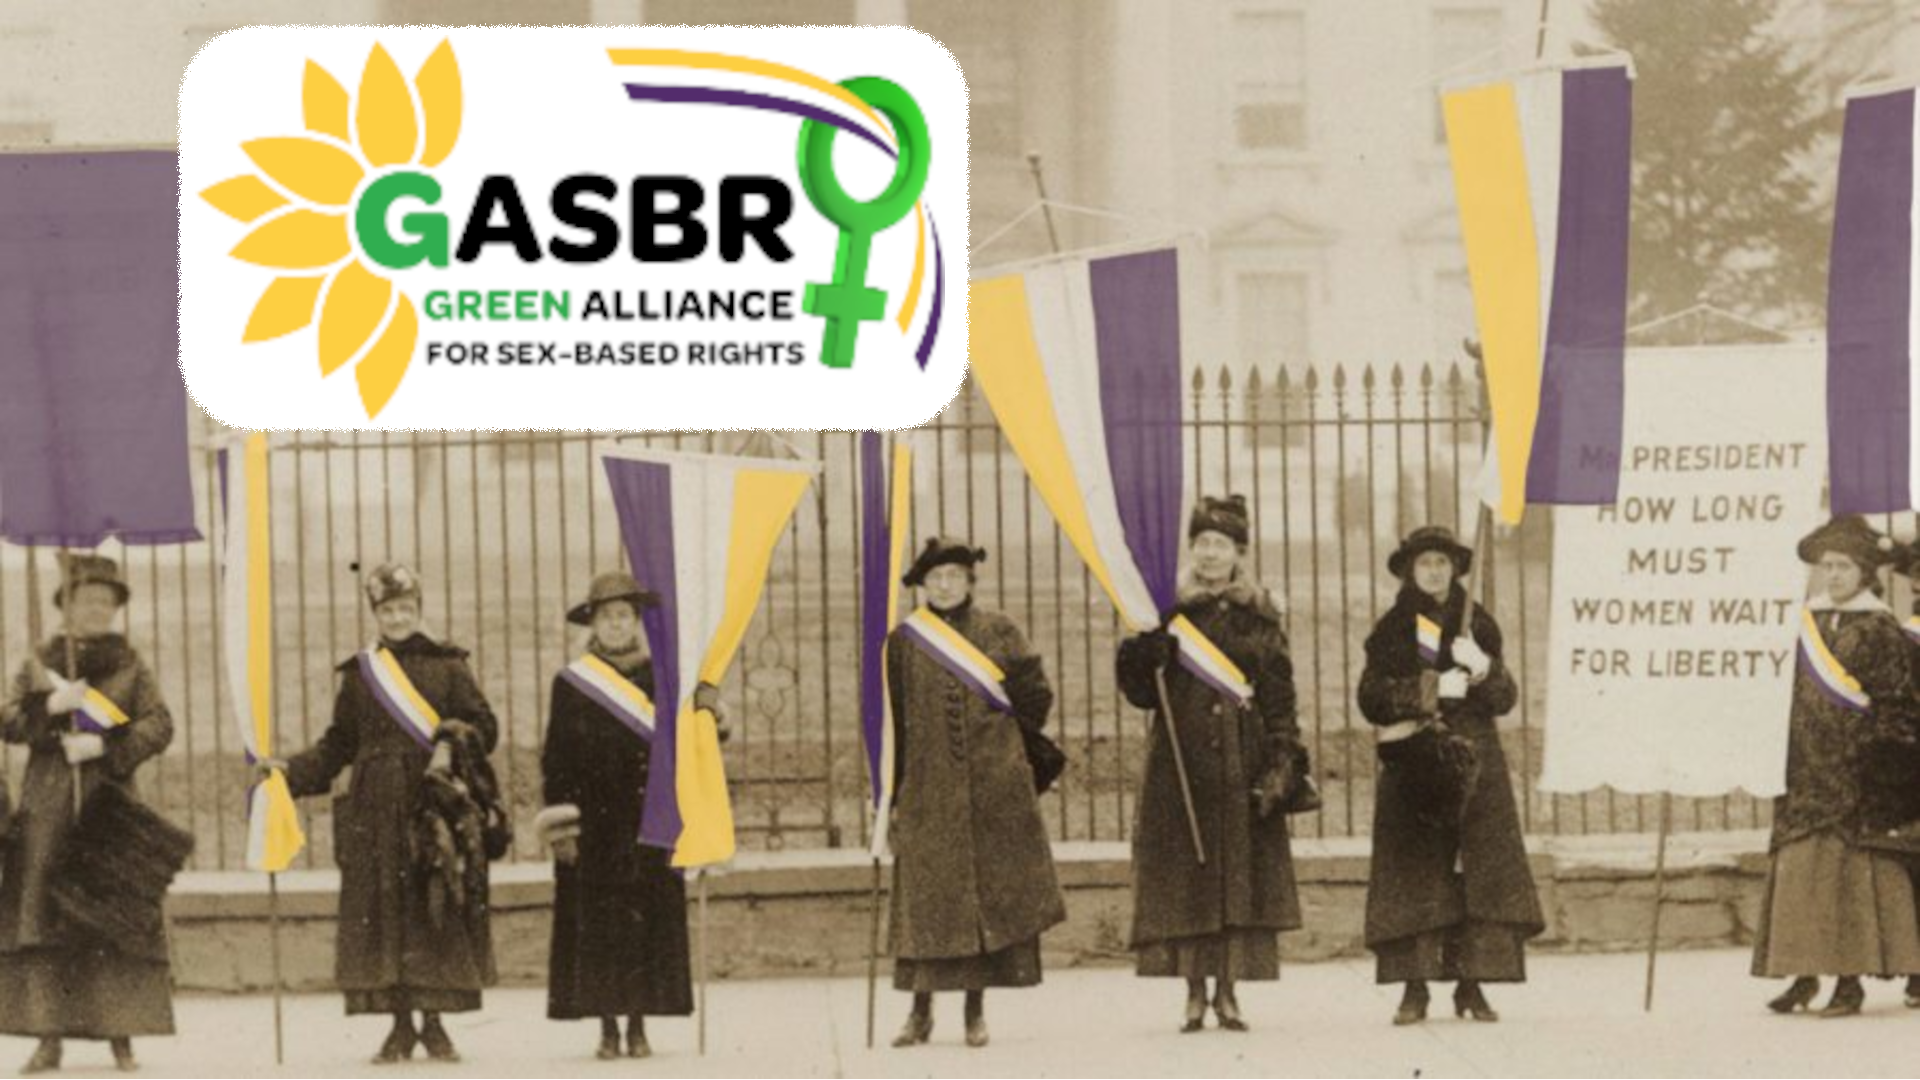 The Green Alliance for Sex-Based Rights